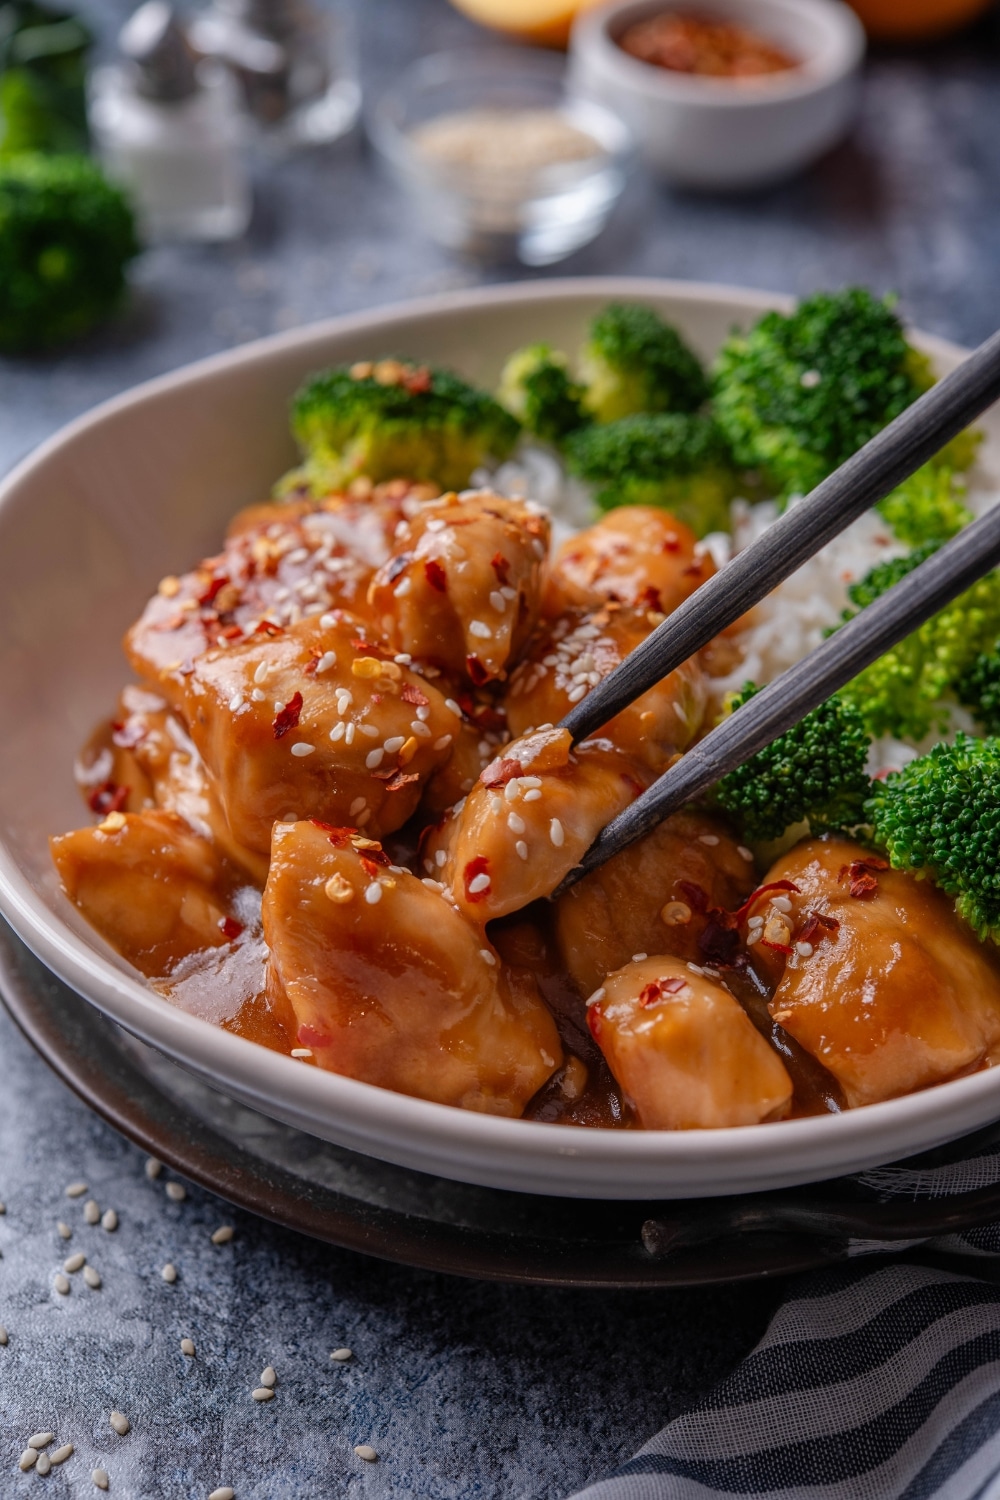 A plate of orange chicken garnished with sesame seeds and a pair of chopsticks is grabbing a piece of chicken.